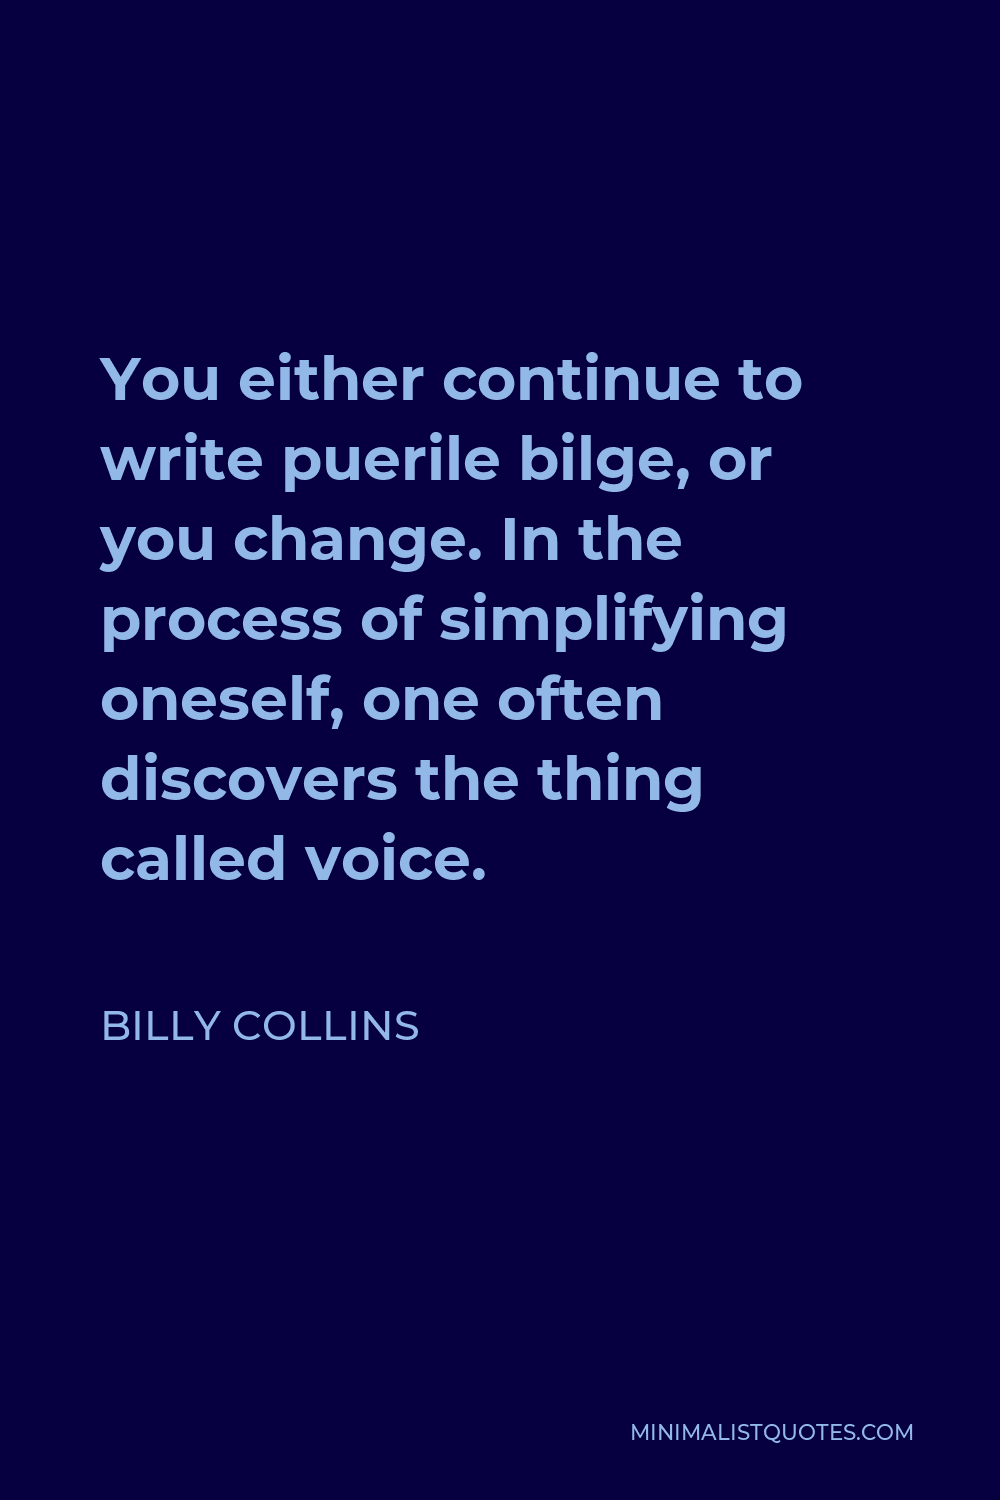 Billy Collins Quote - You either continue to write puerile bilge, or you change. In the process of simplifying oneself, one often discovers the thing called voice.